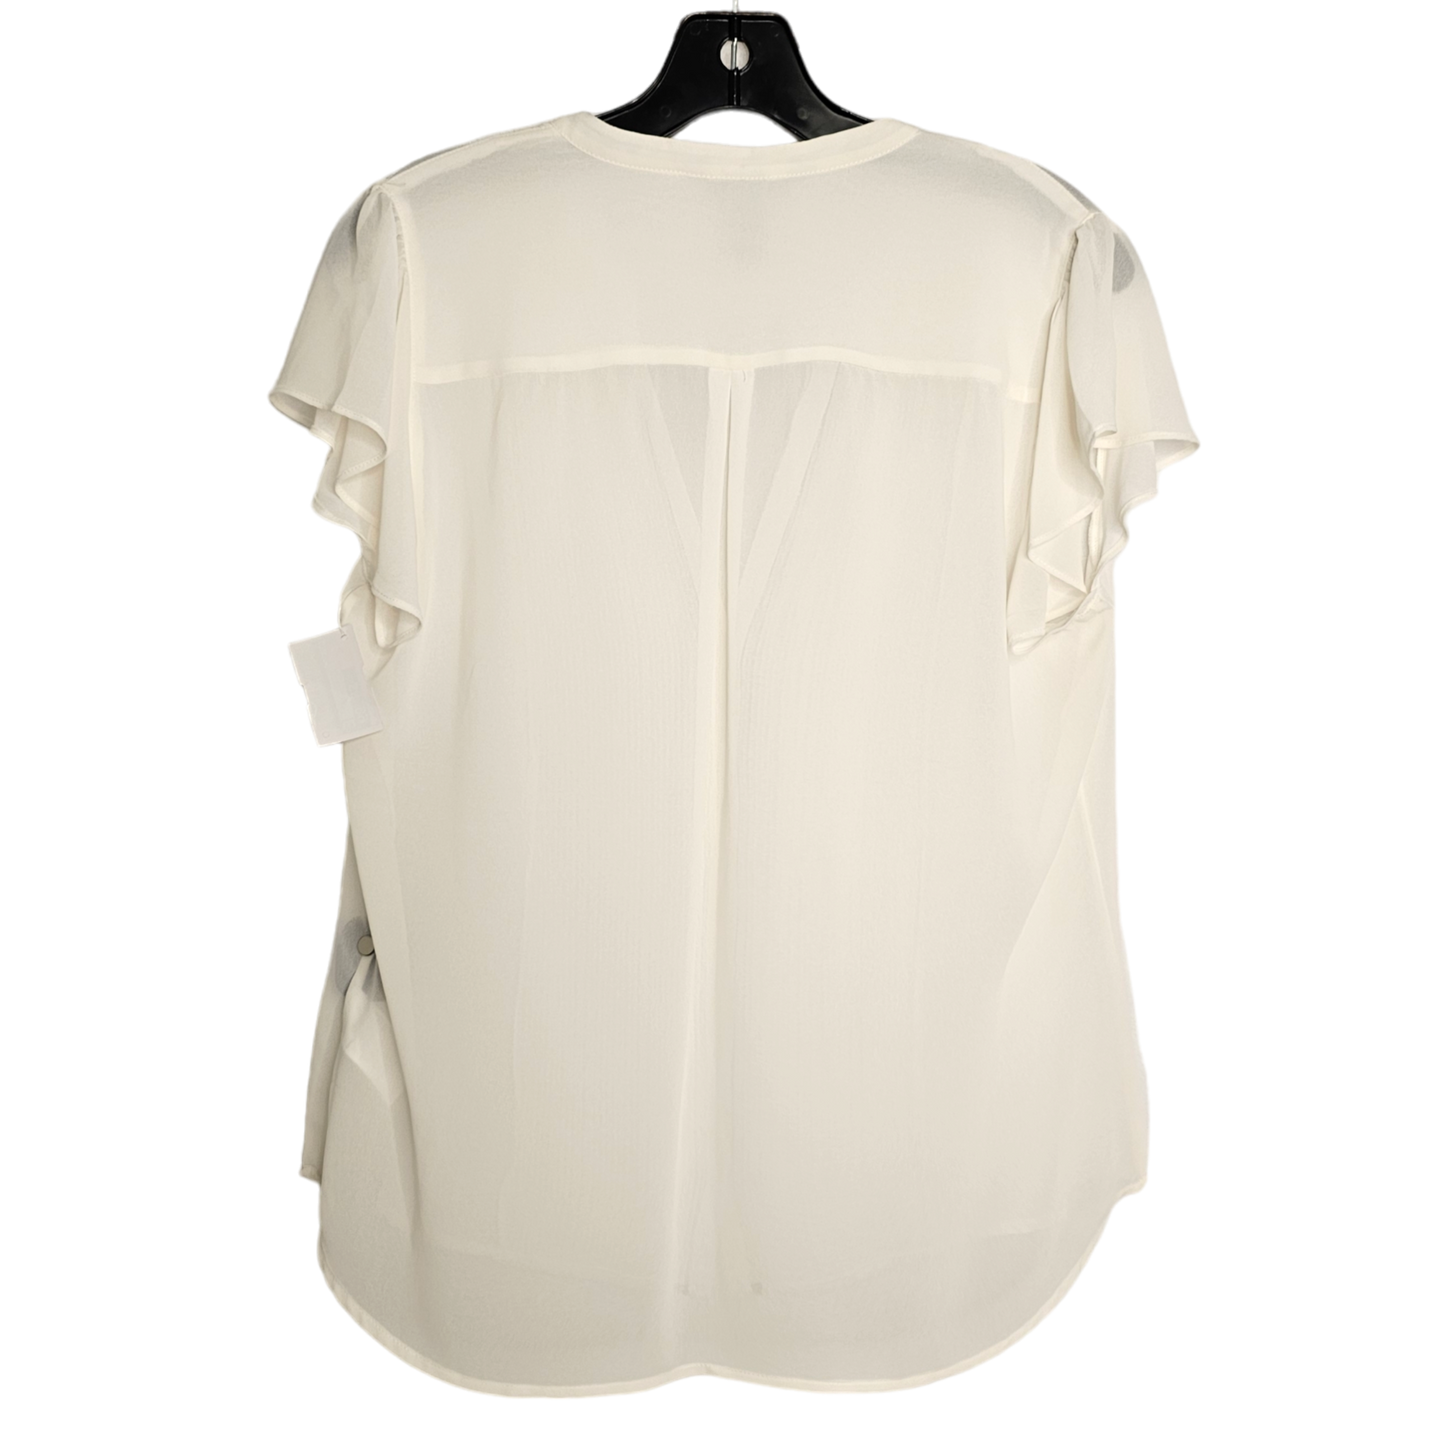 White Top Short Sleeve H&m, Size Xl